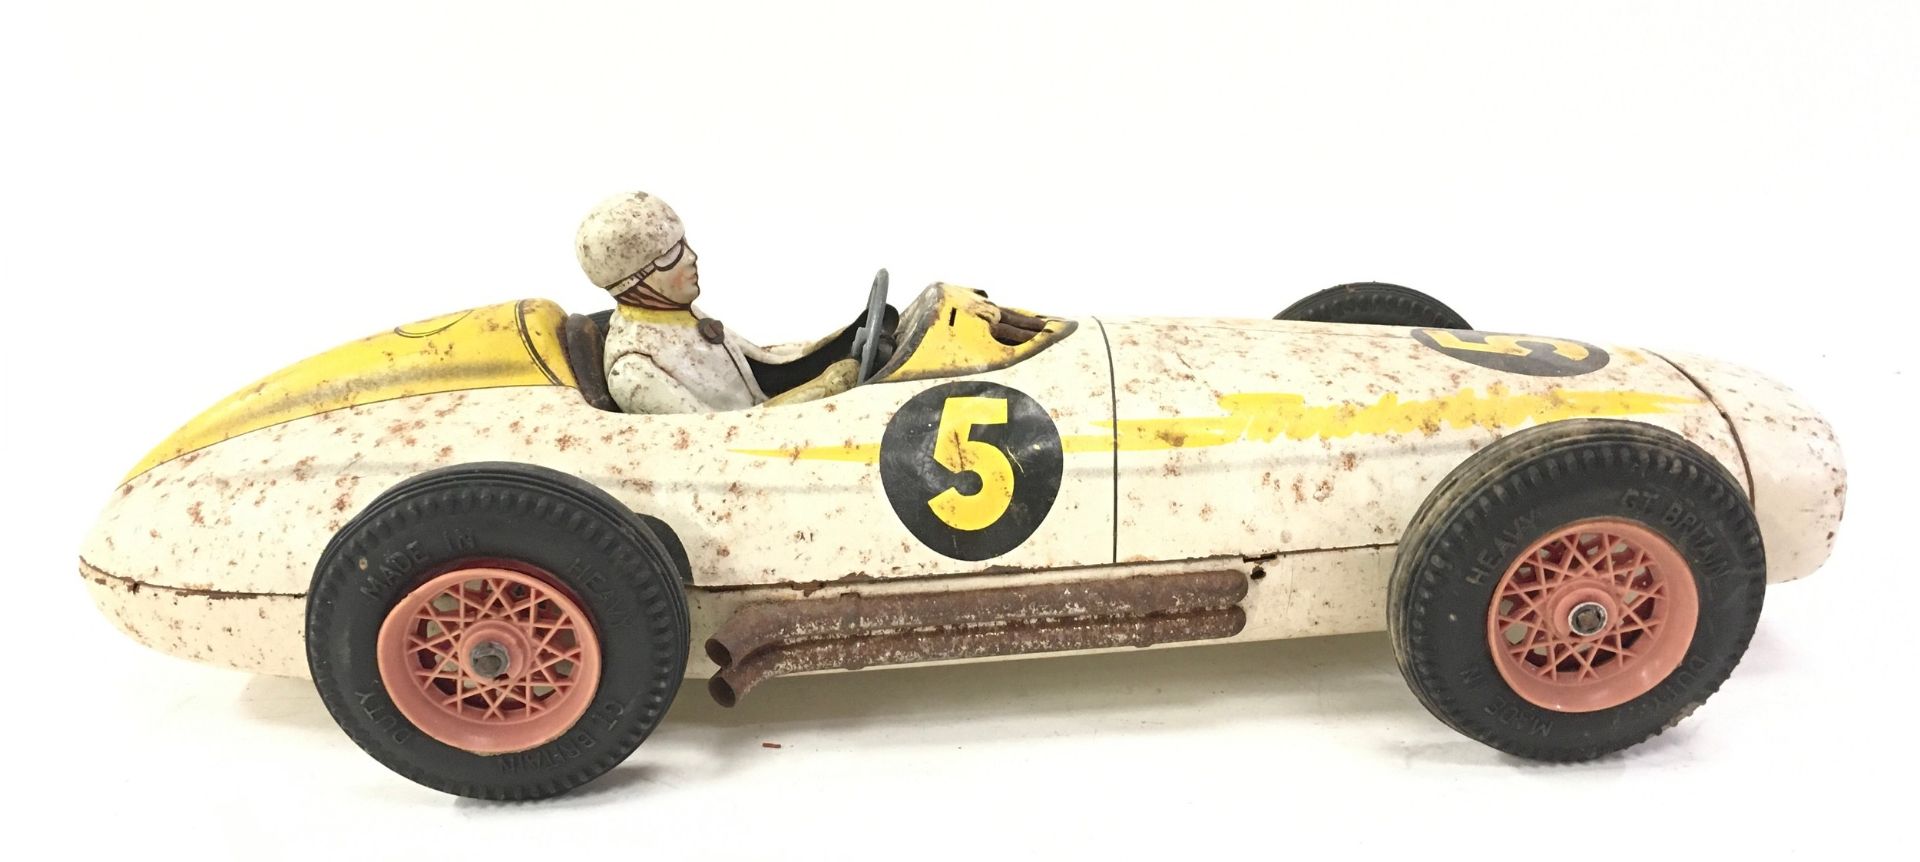 Mettoy (UK) large tinplate "Thunderbird" Mercedes Racing Car - friction drive model with driver